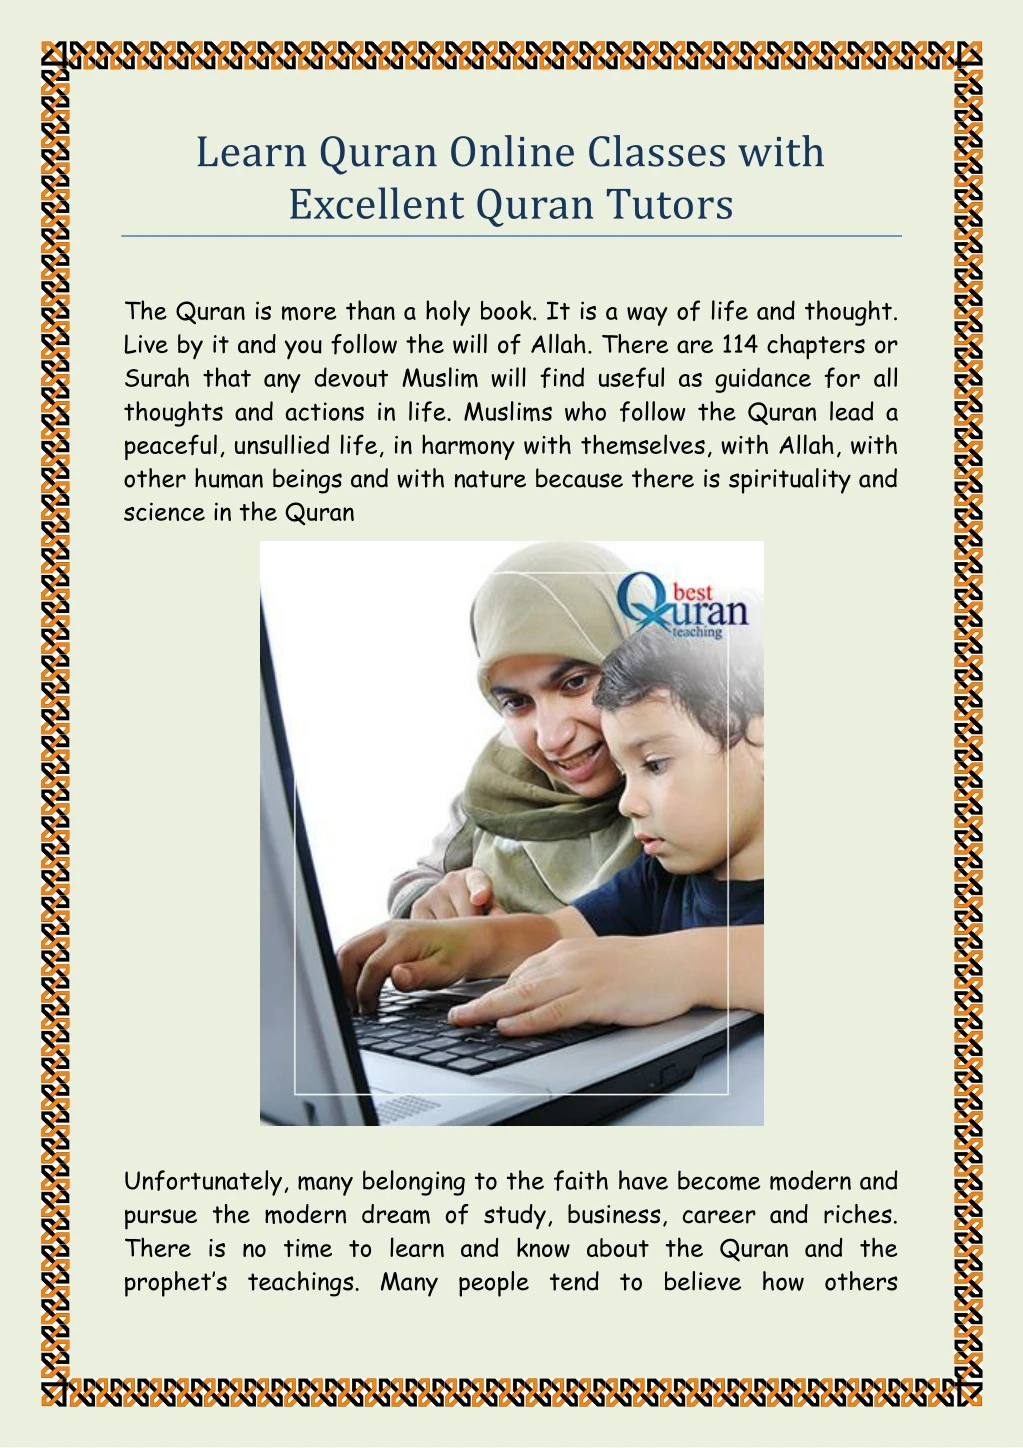 learn quran online classes with excellent quran